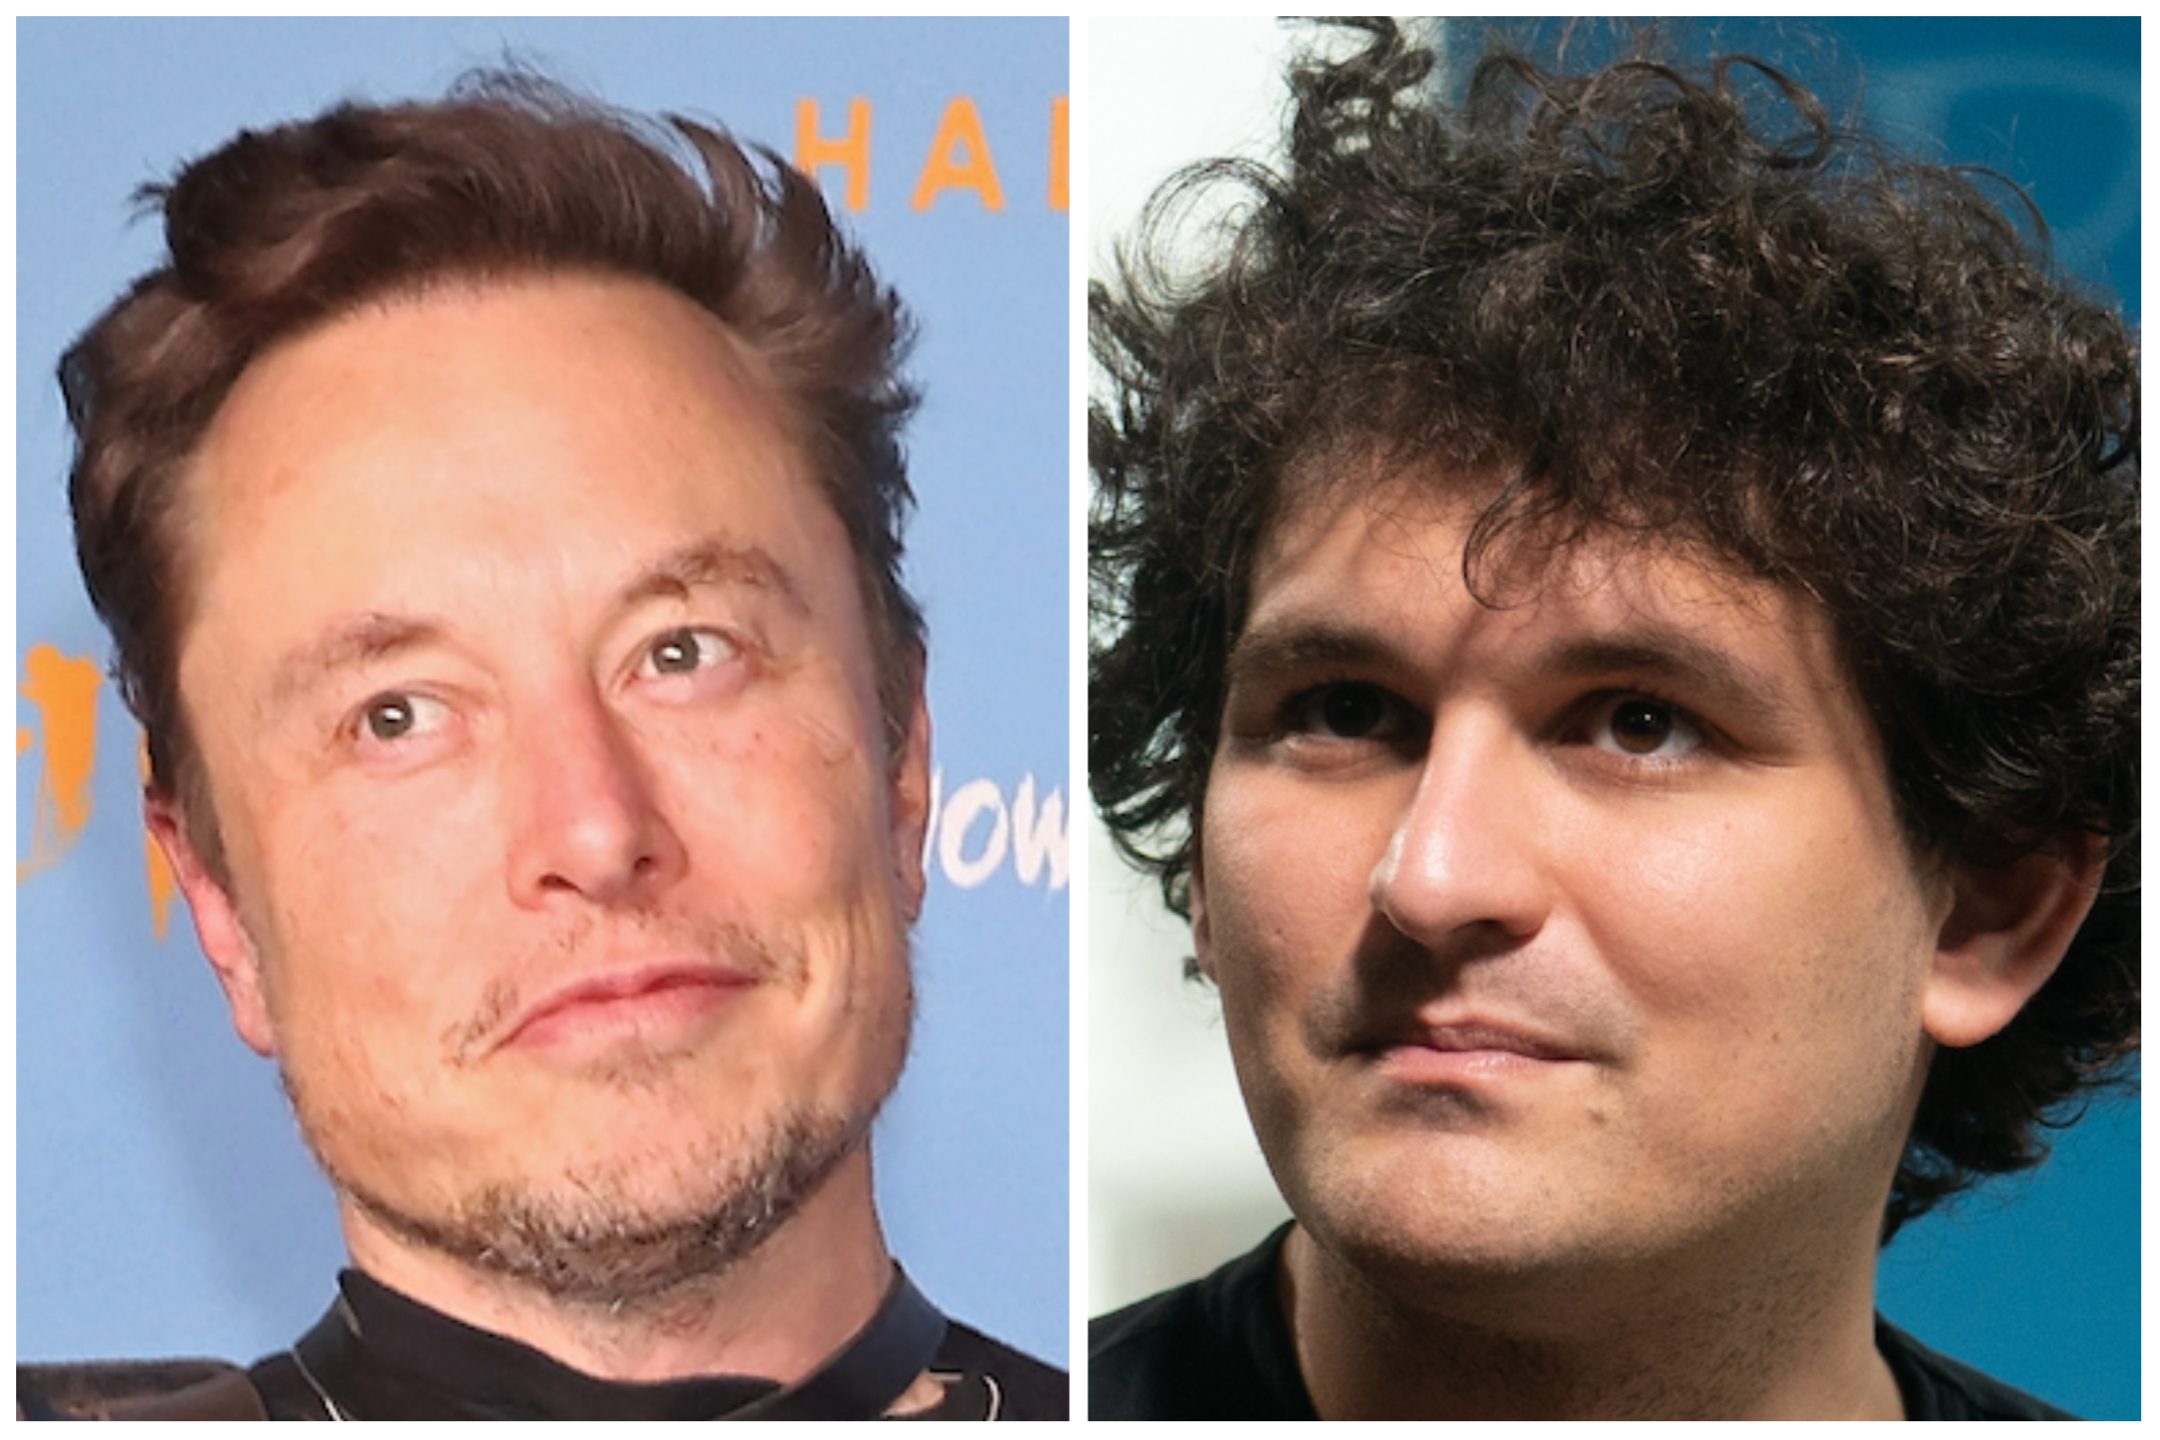 Musk Takes New Media Outlet To School After Failed Bankman-Fried Exposé